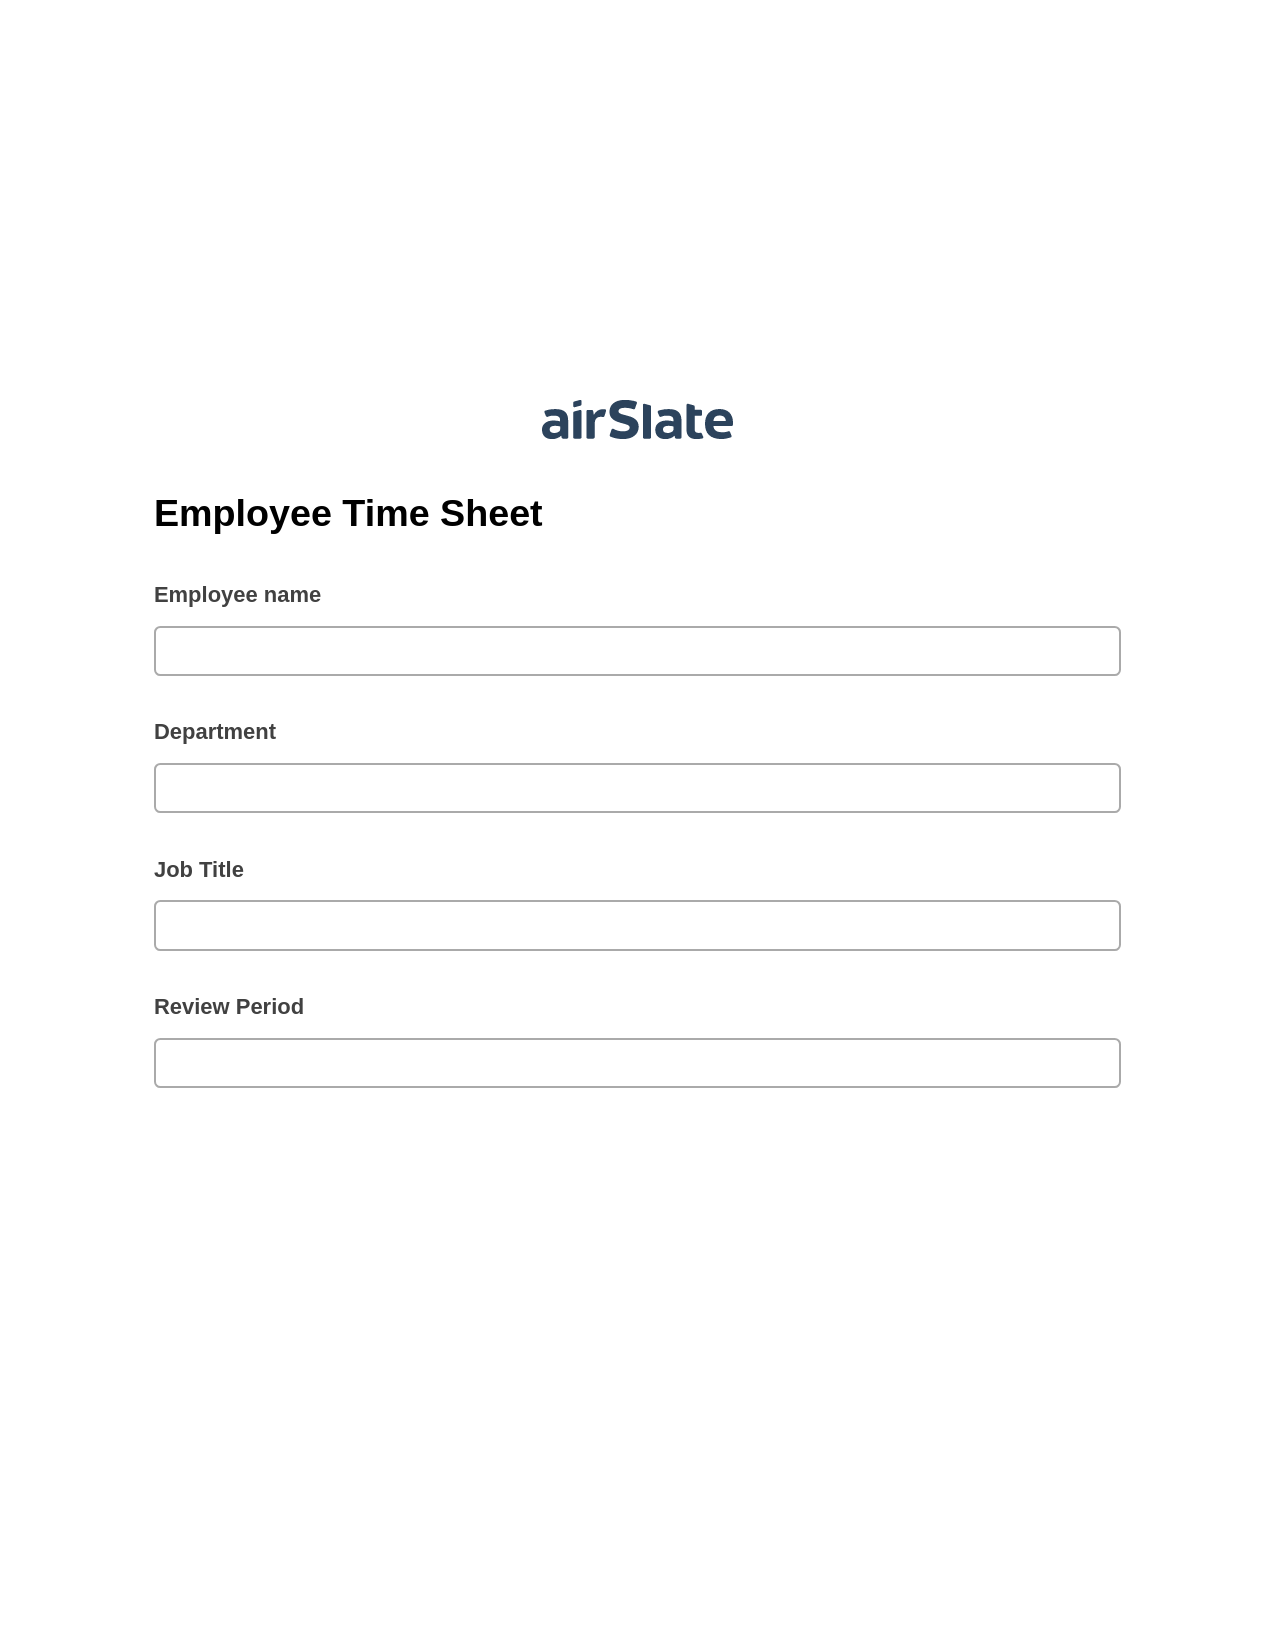 Employee Time Sheet Prefill from NetSuite records, Export to MS Dynamics 365 Bot, Webhook Postfinish Bot